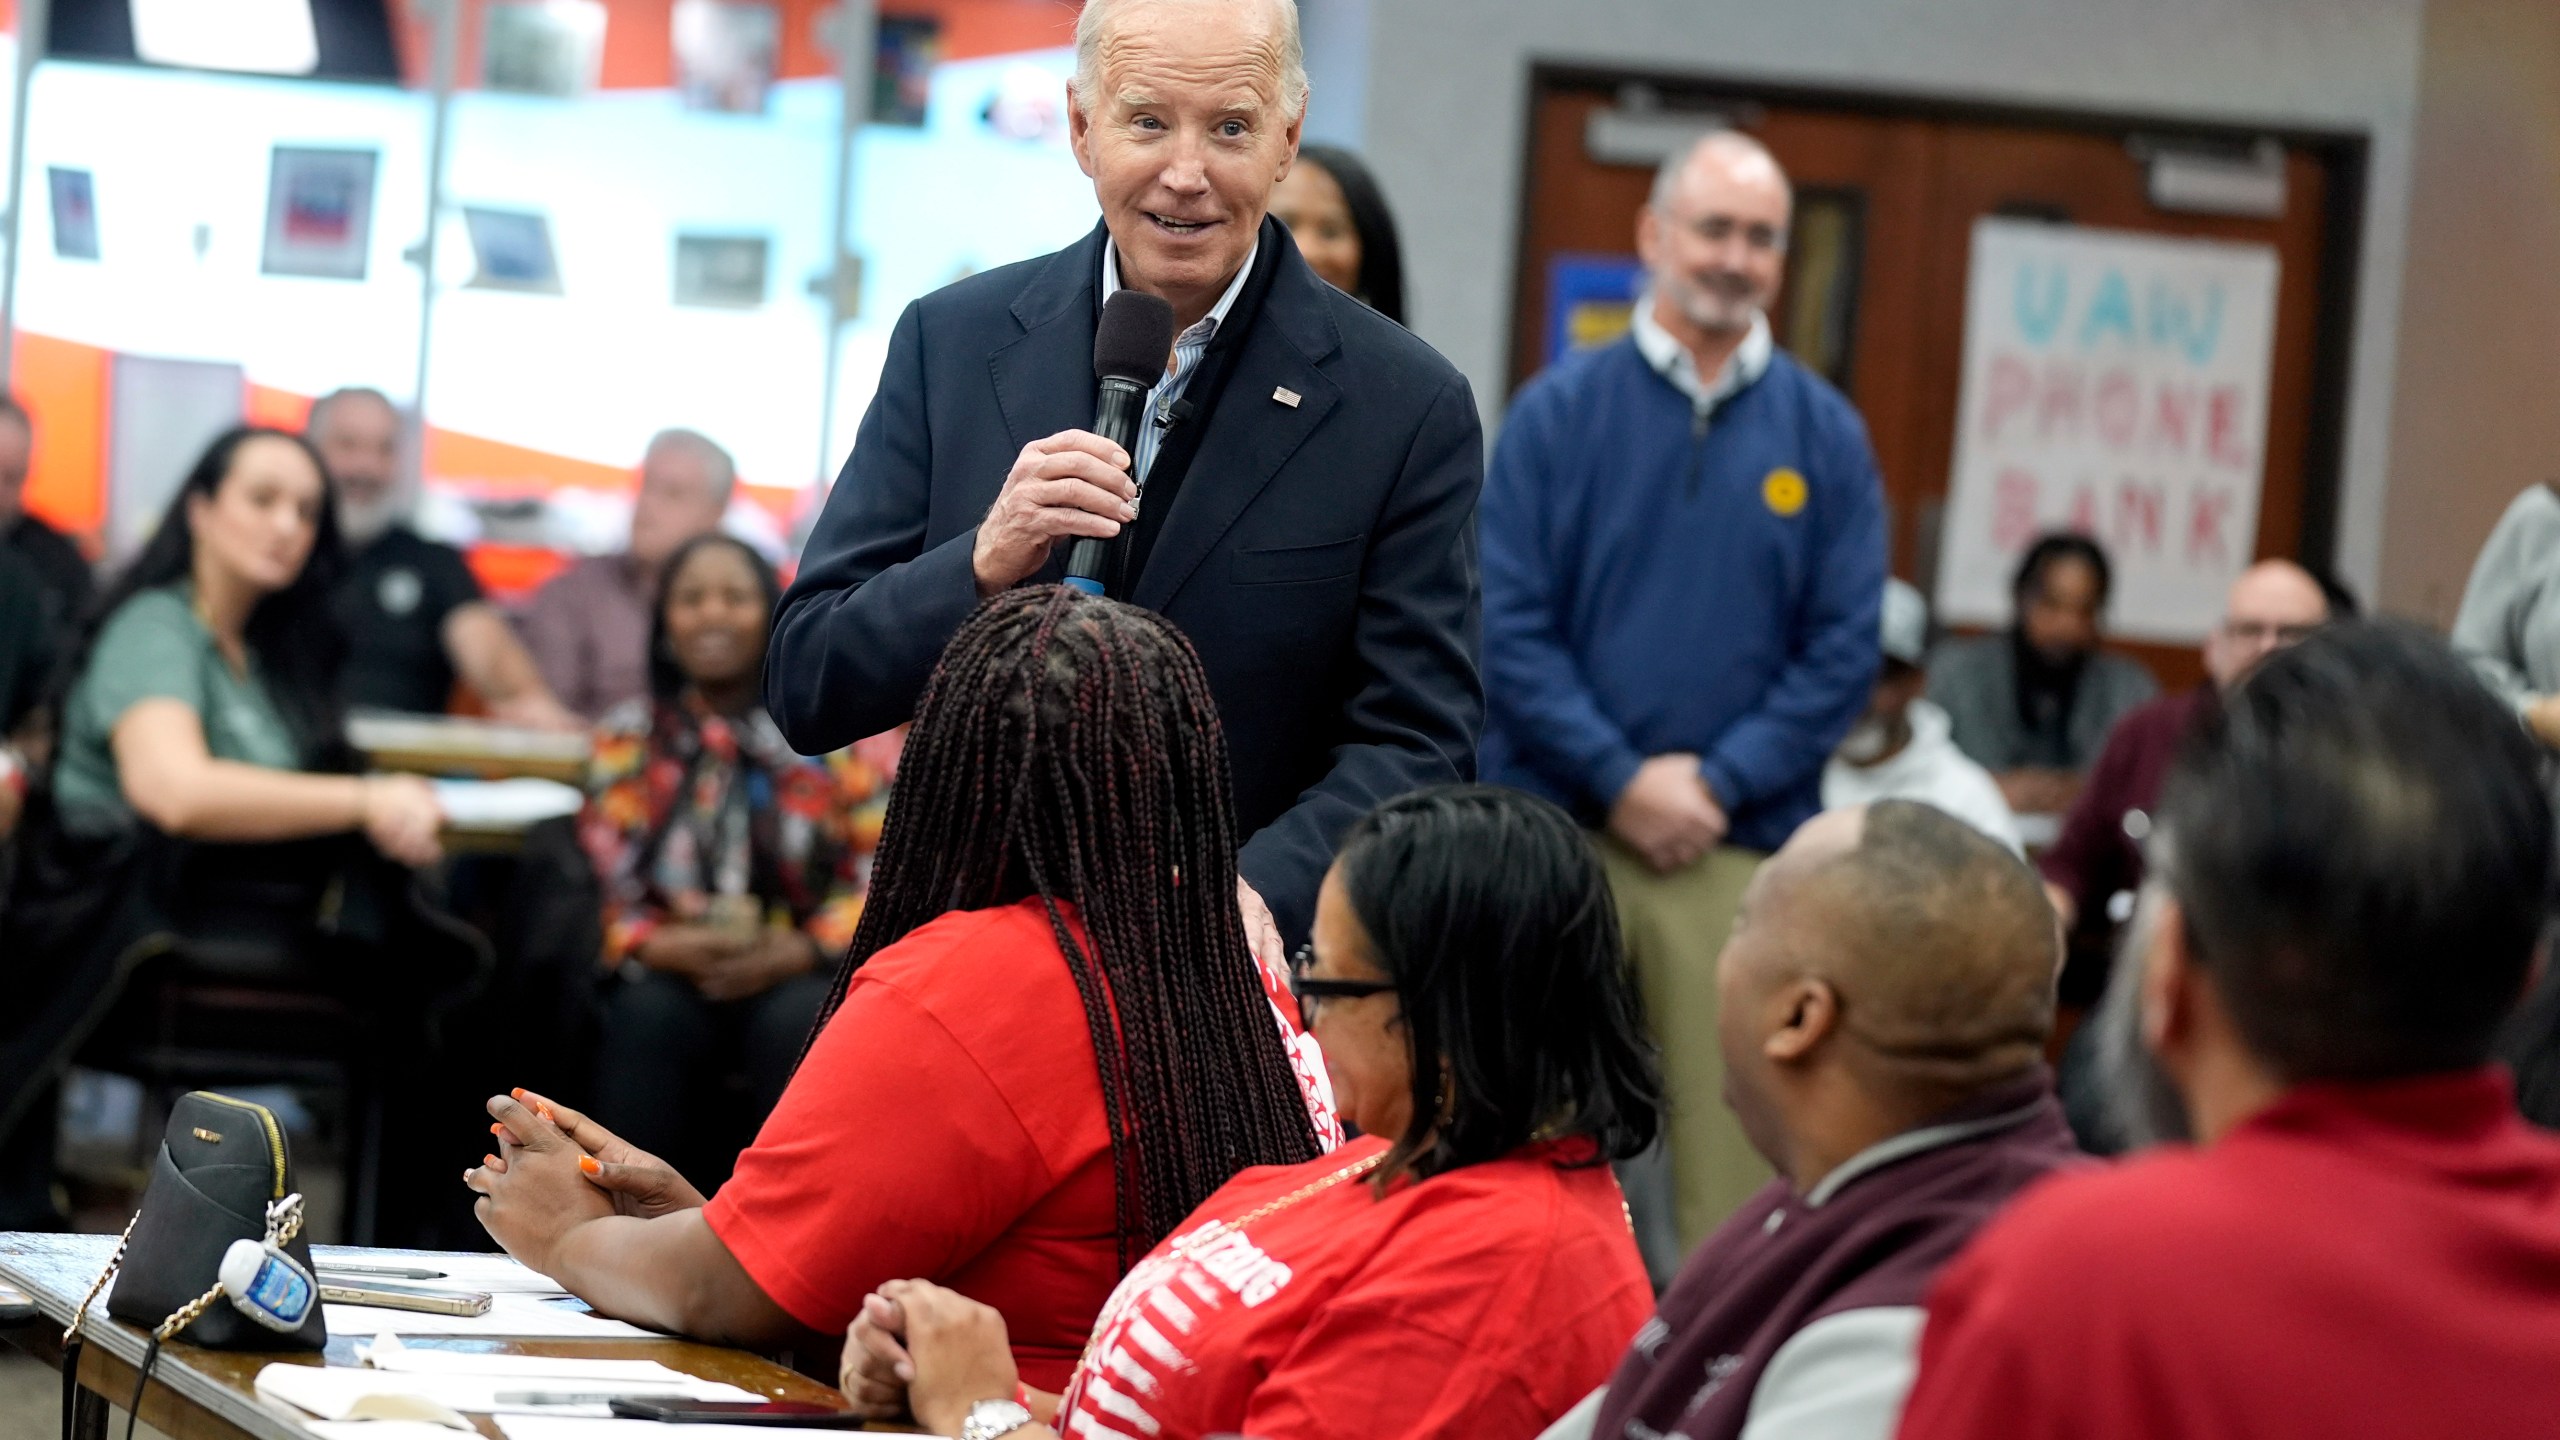 FILE - President Joe Biden addresses UAW members during a campaign stop, Feb. 1, 2024, in Warren, Mich. Former President Donald Trump is urging Republicans in Michigan to target Black voters in Detroit and other predominantly African American areas in the swing state, state GOP leaders said Monday, March 25. Both Biden and Trump will hotly contest Michigan, a state that flipped Democratic in 2020 and is widely seen as critical to both candidates' chances in November. (AP Photo/Evan Vucci, File)